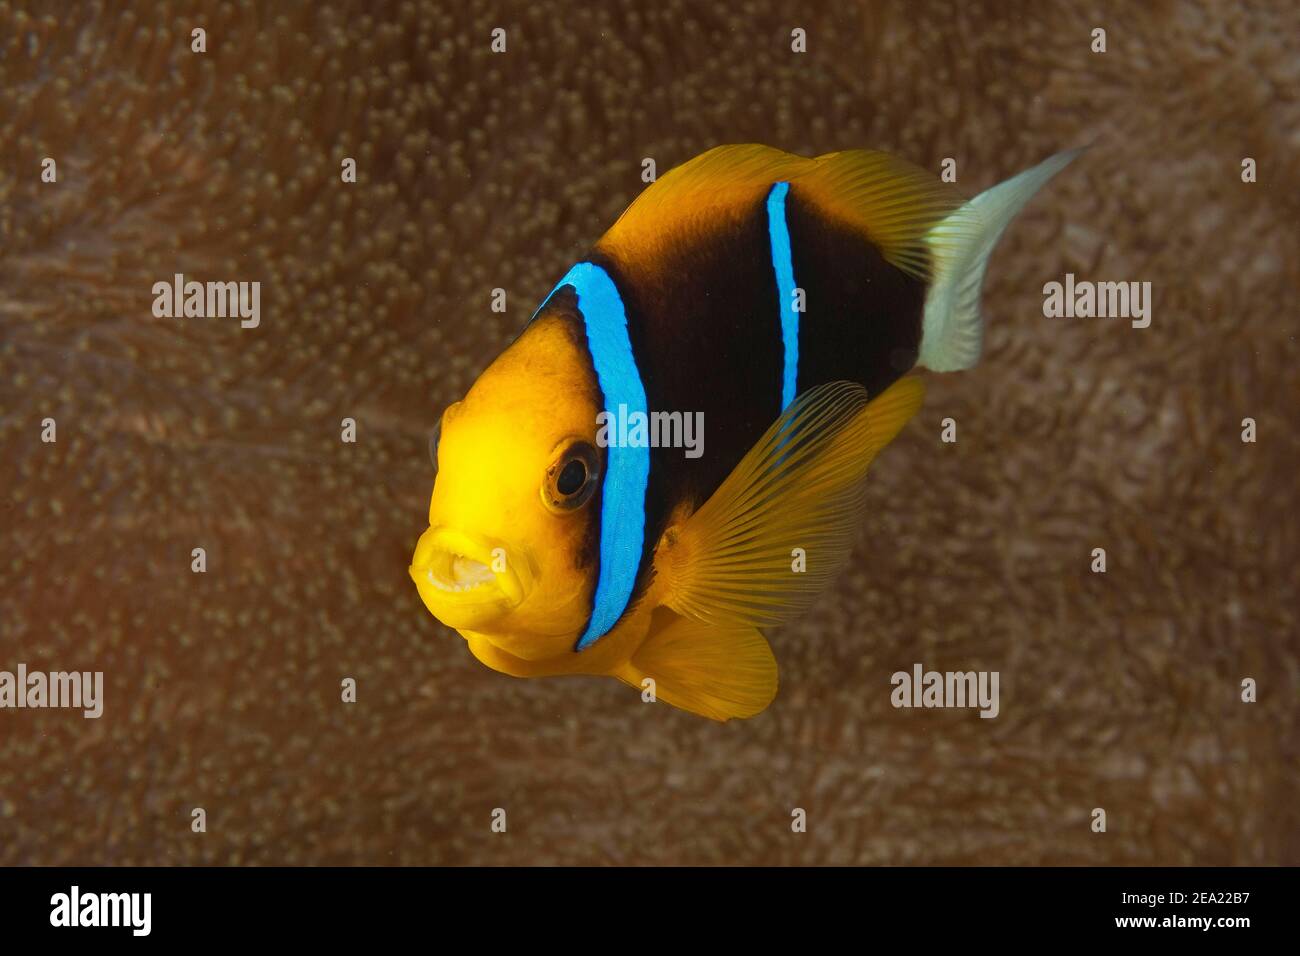 Orange-fin clownfish (Amphiprion chrysopterus), Pacific Ocean Stock Photo